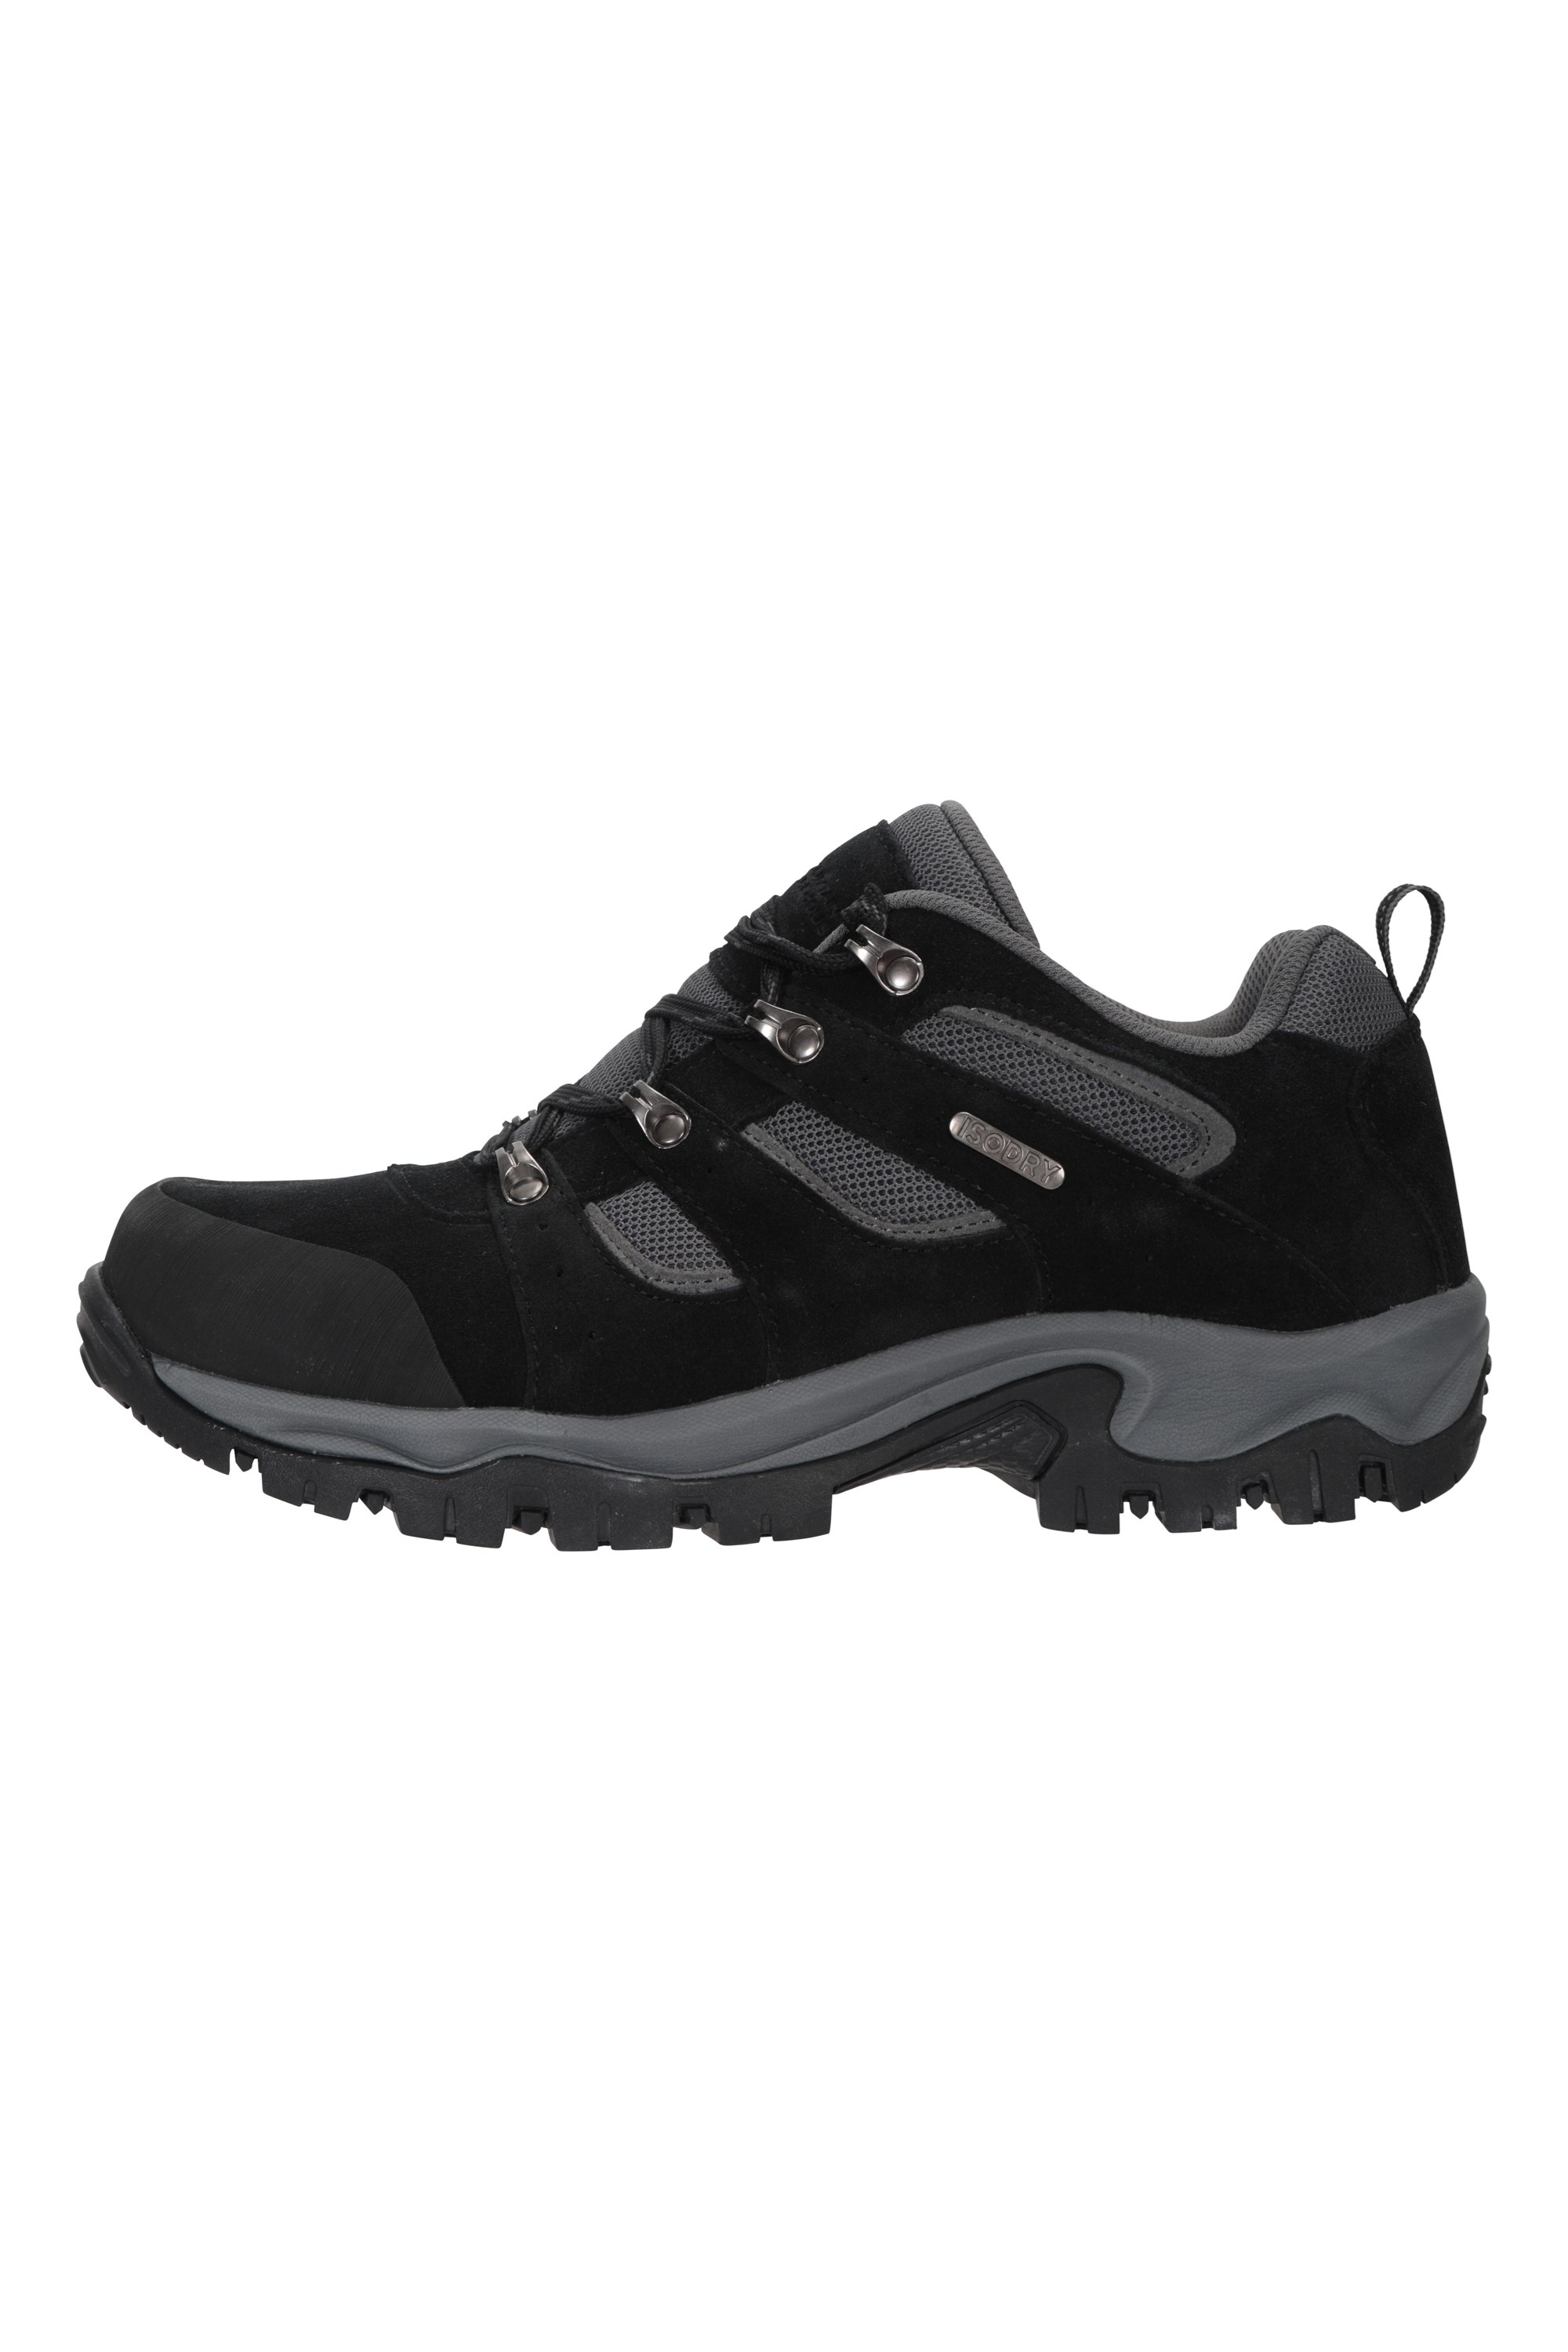 Mountain Warehouse Hommes Balance Active Trainer 